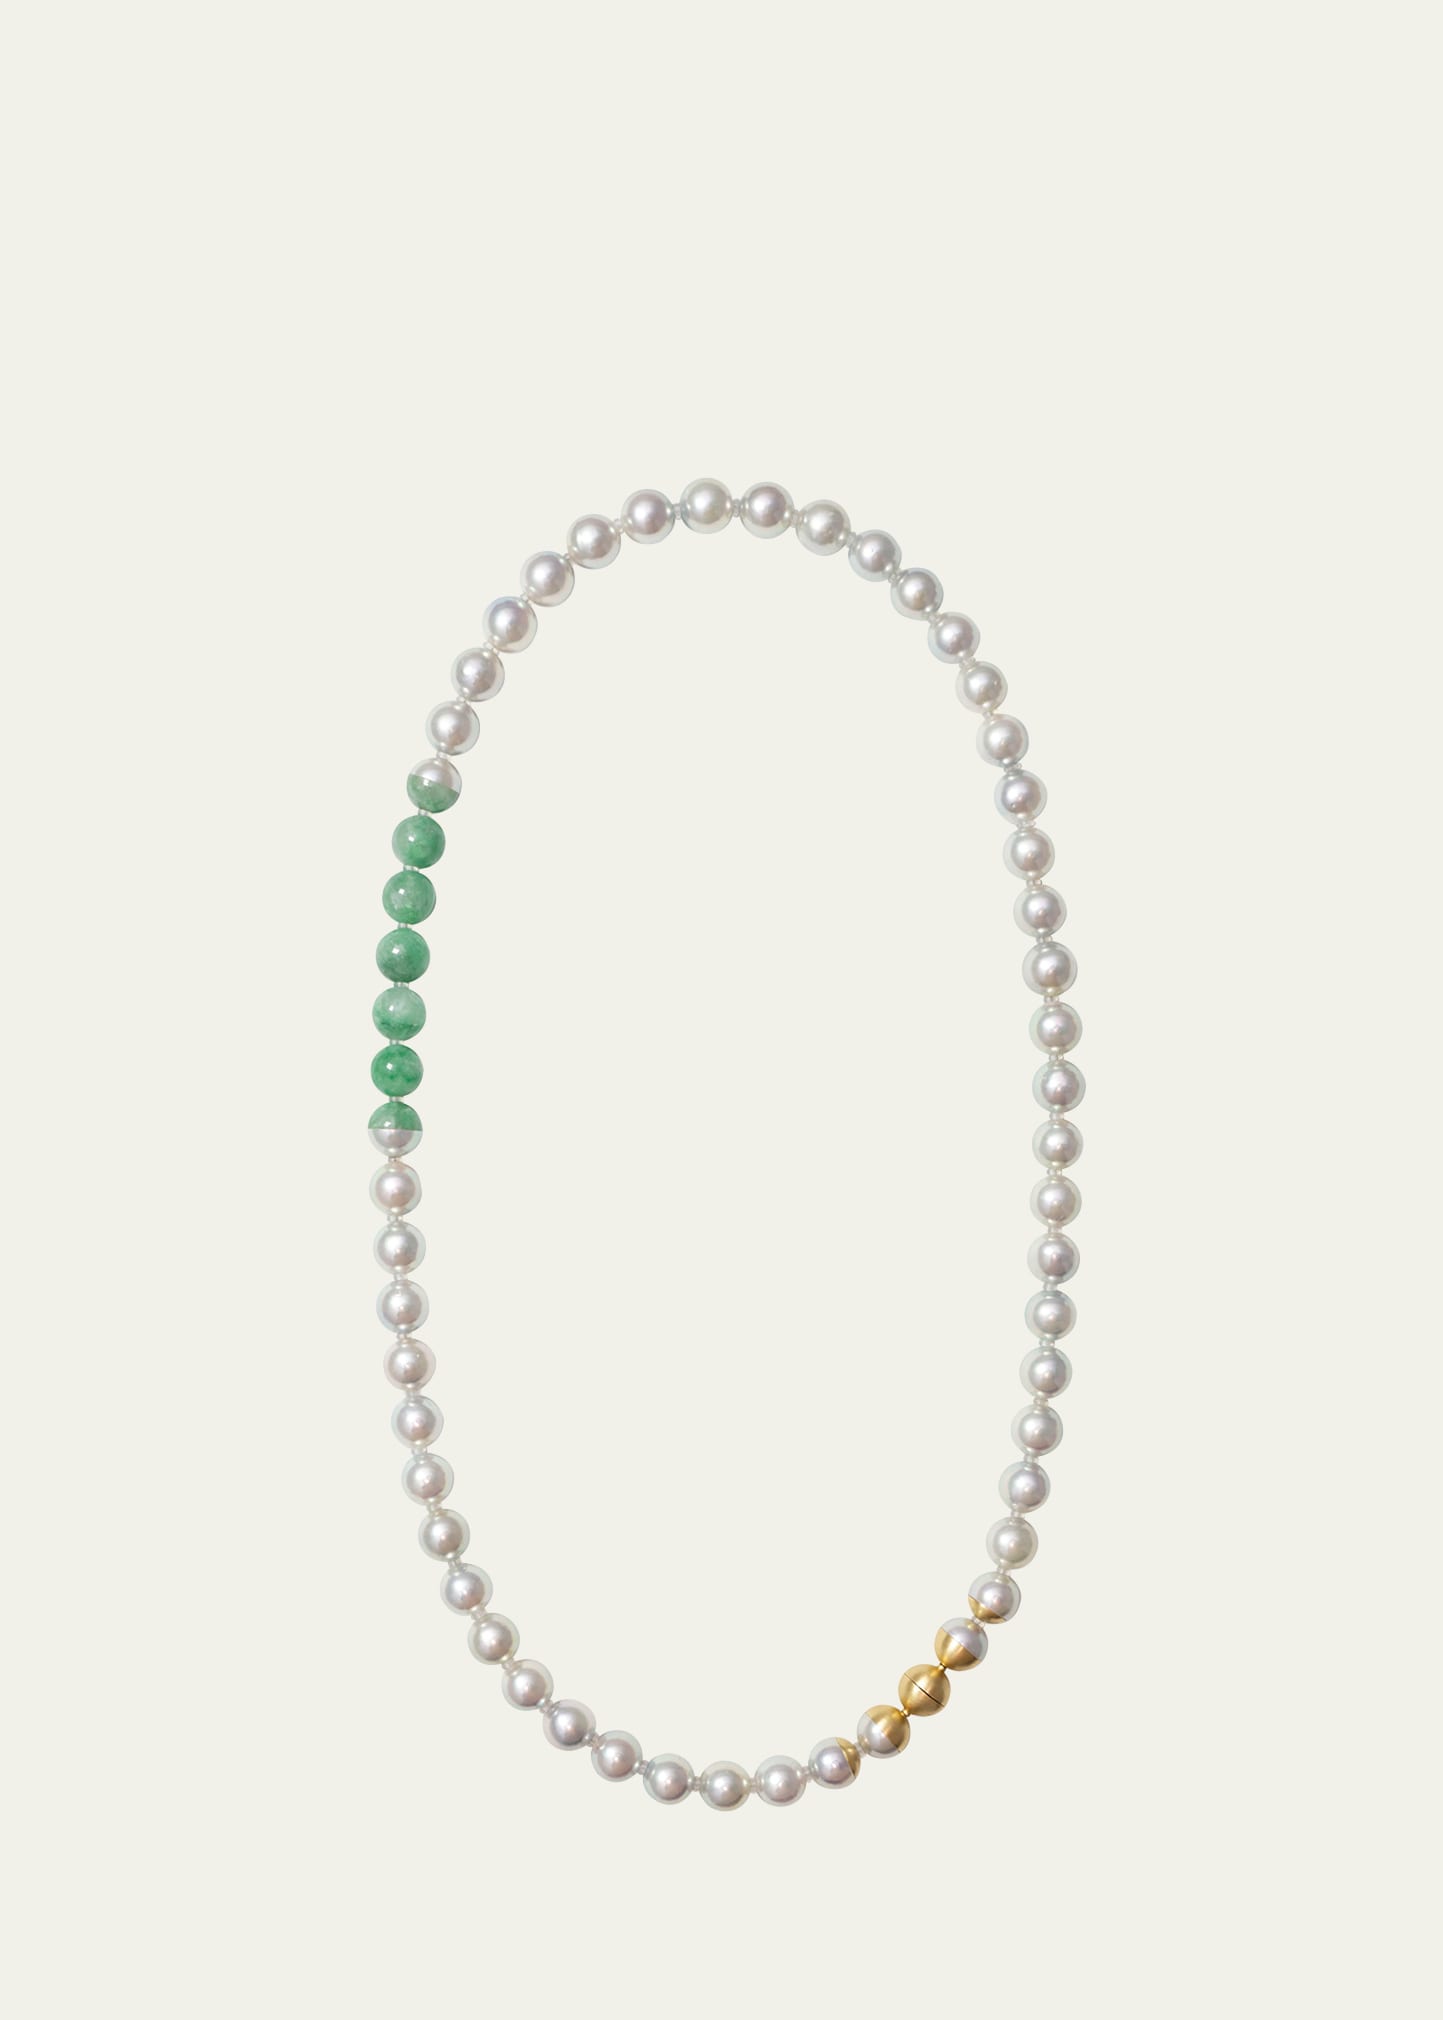 Yutai 18k Yellow Gold Sectional Pearl Necklace With Jade And Cultured Akoya Pearls In Green Jade